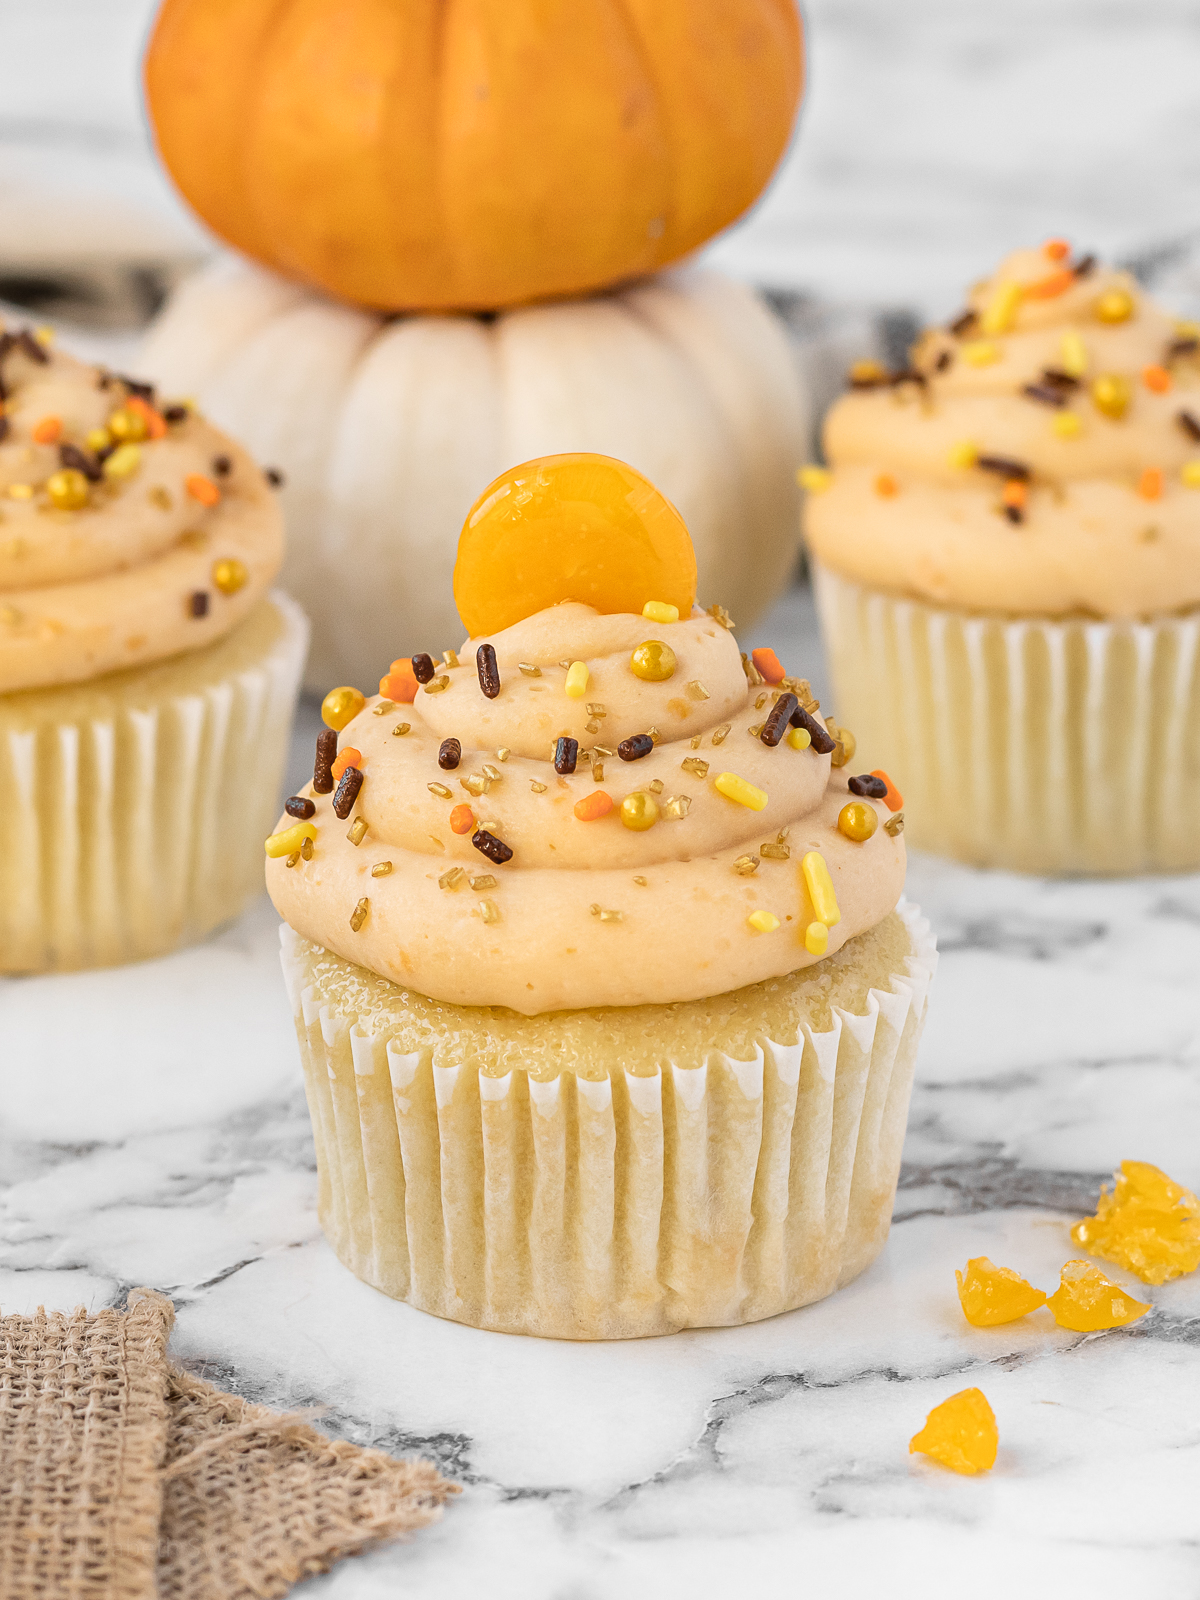 Cupcakes topped with butterscotch buttercream, festive fall sprinkles, and a butterscotch candy.